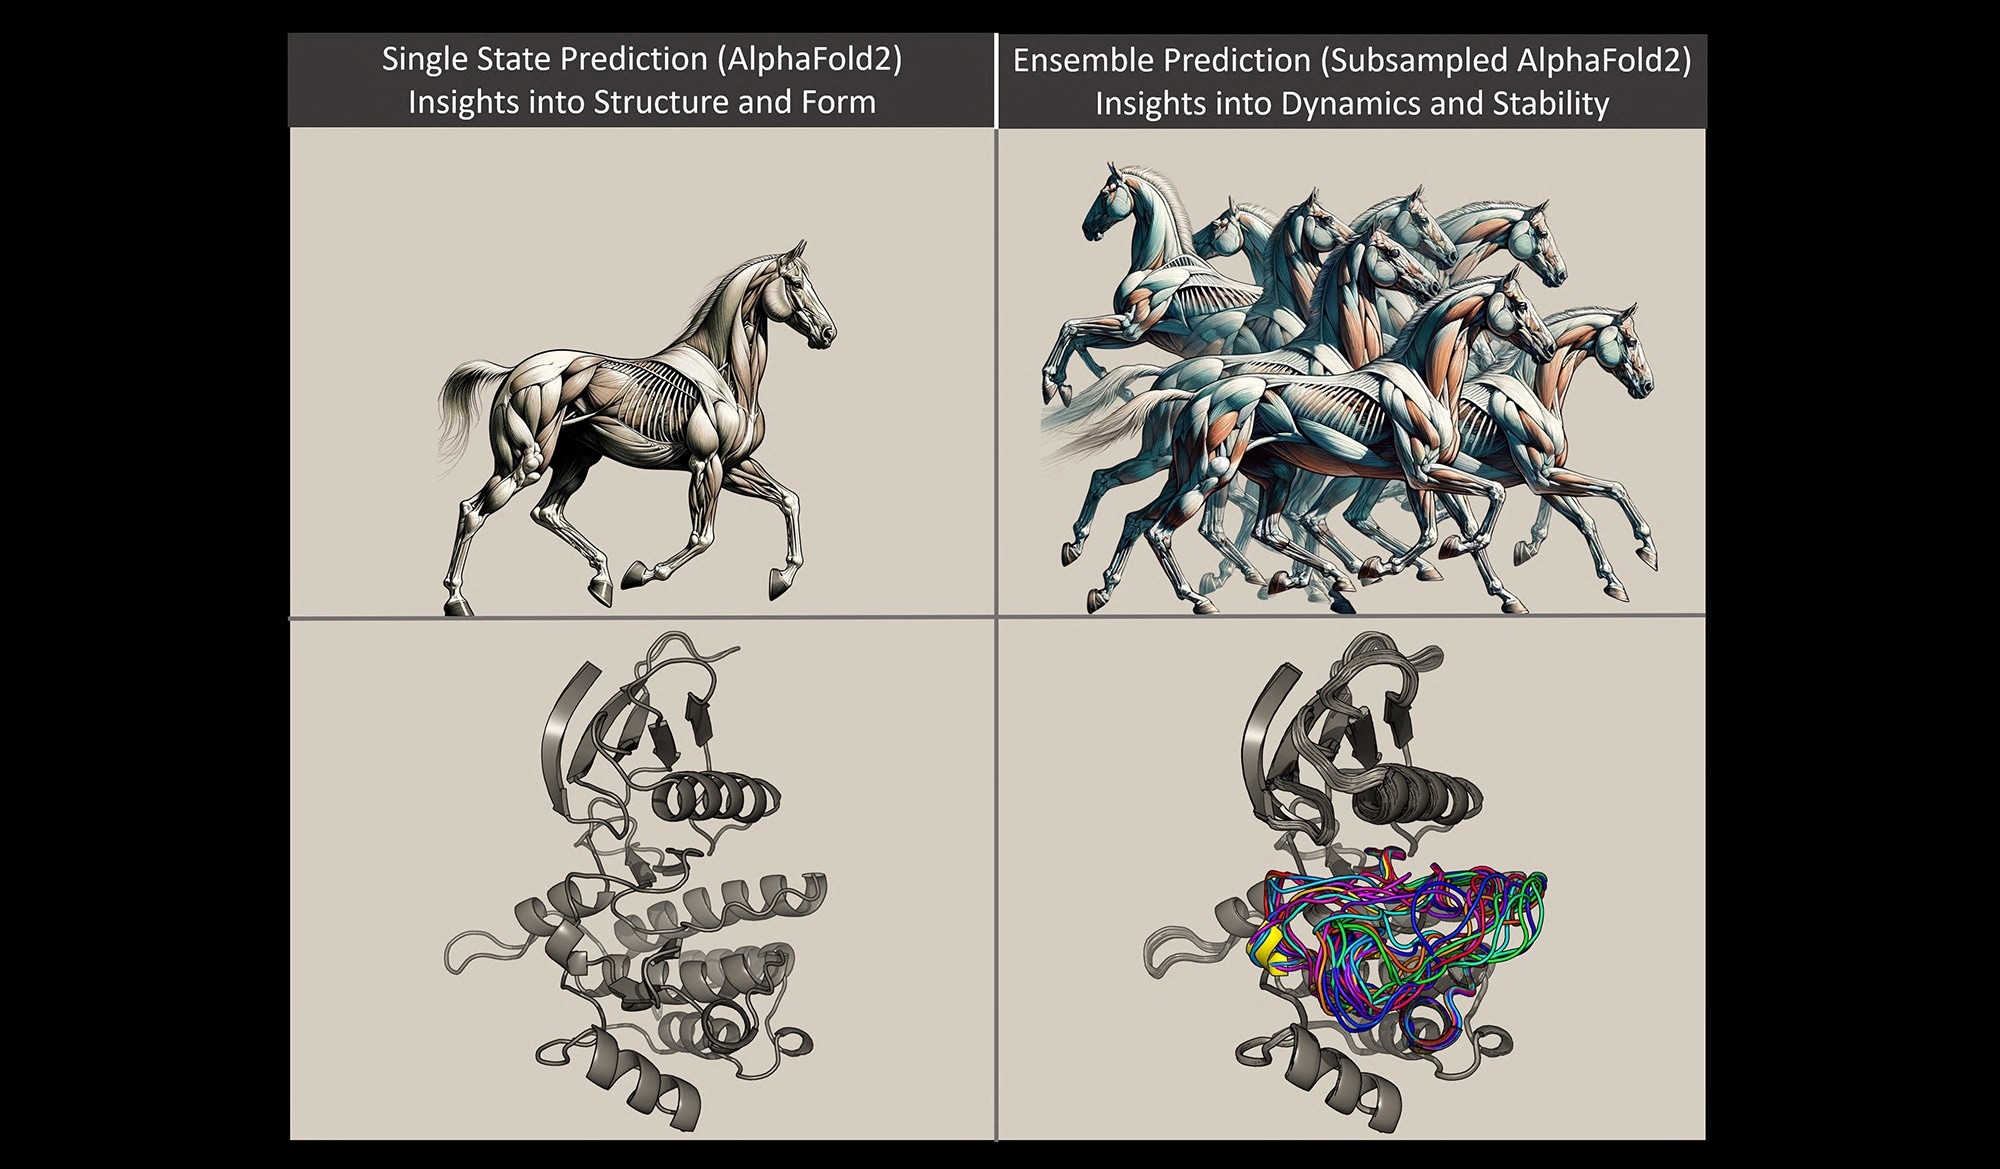 In the same way that multiple snapshots of a galloping horse provide information about how the horse moves, multiple snapshots of a protein changing shape can improve scientific understanding of that protein’s structure and function. Image courtesy of Gabriel Monteiro da Silva.